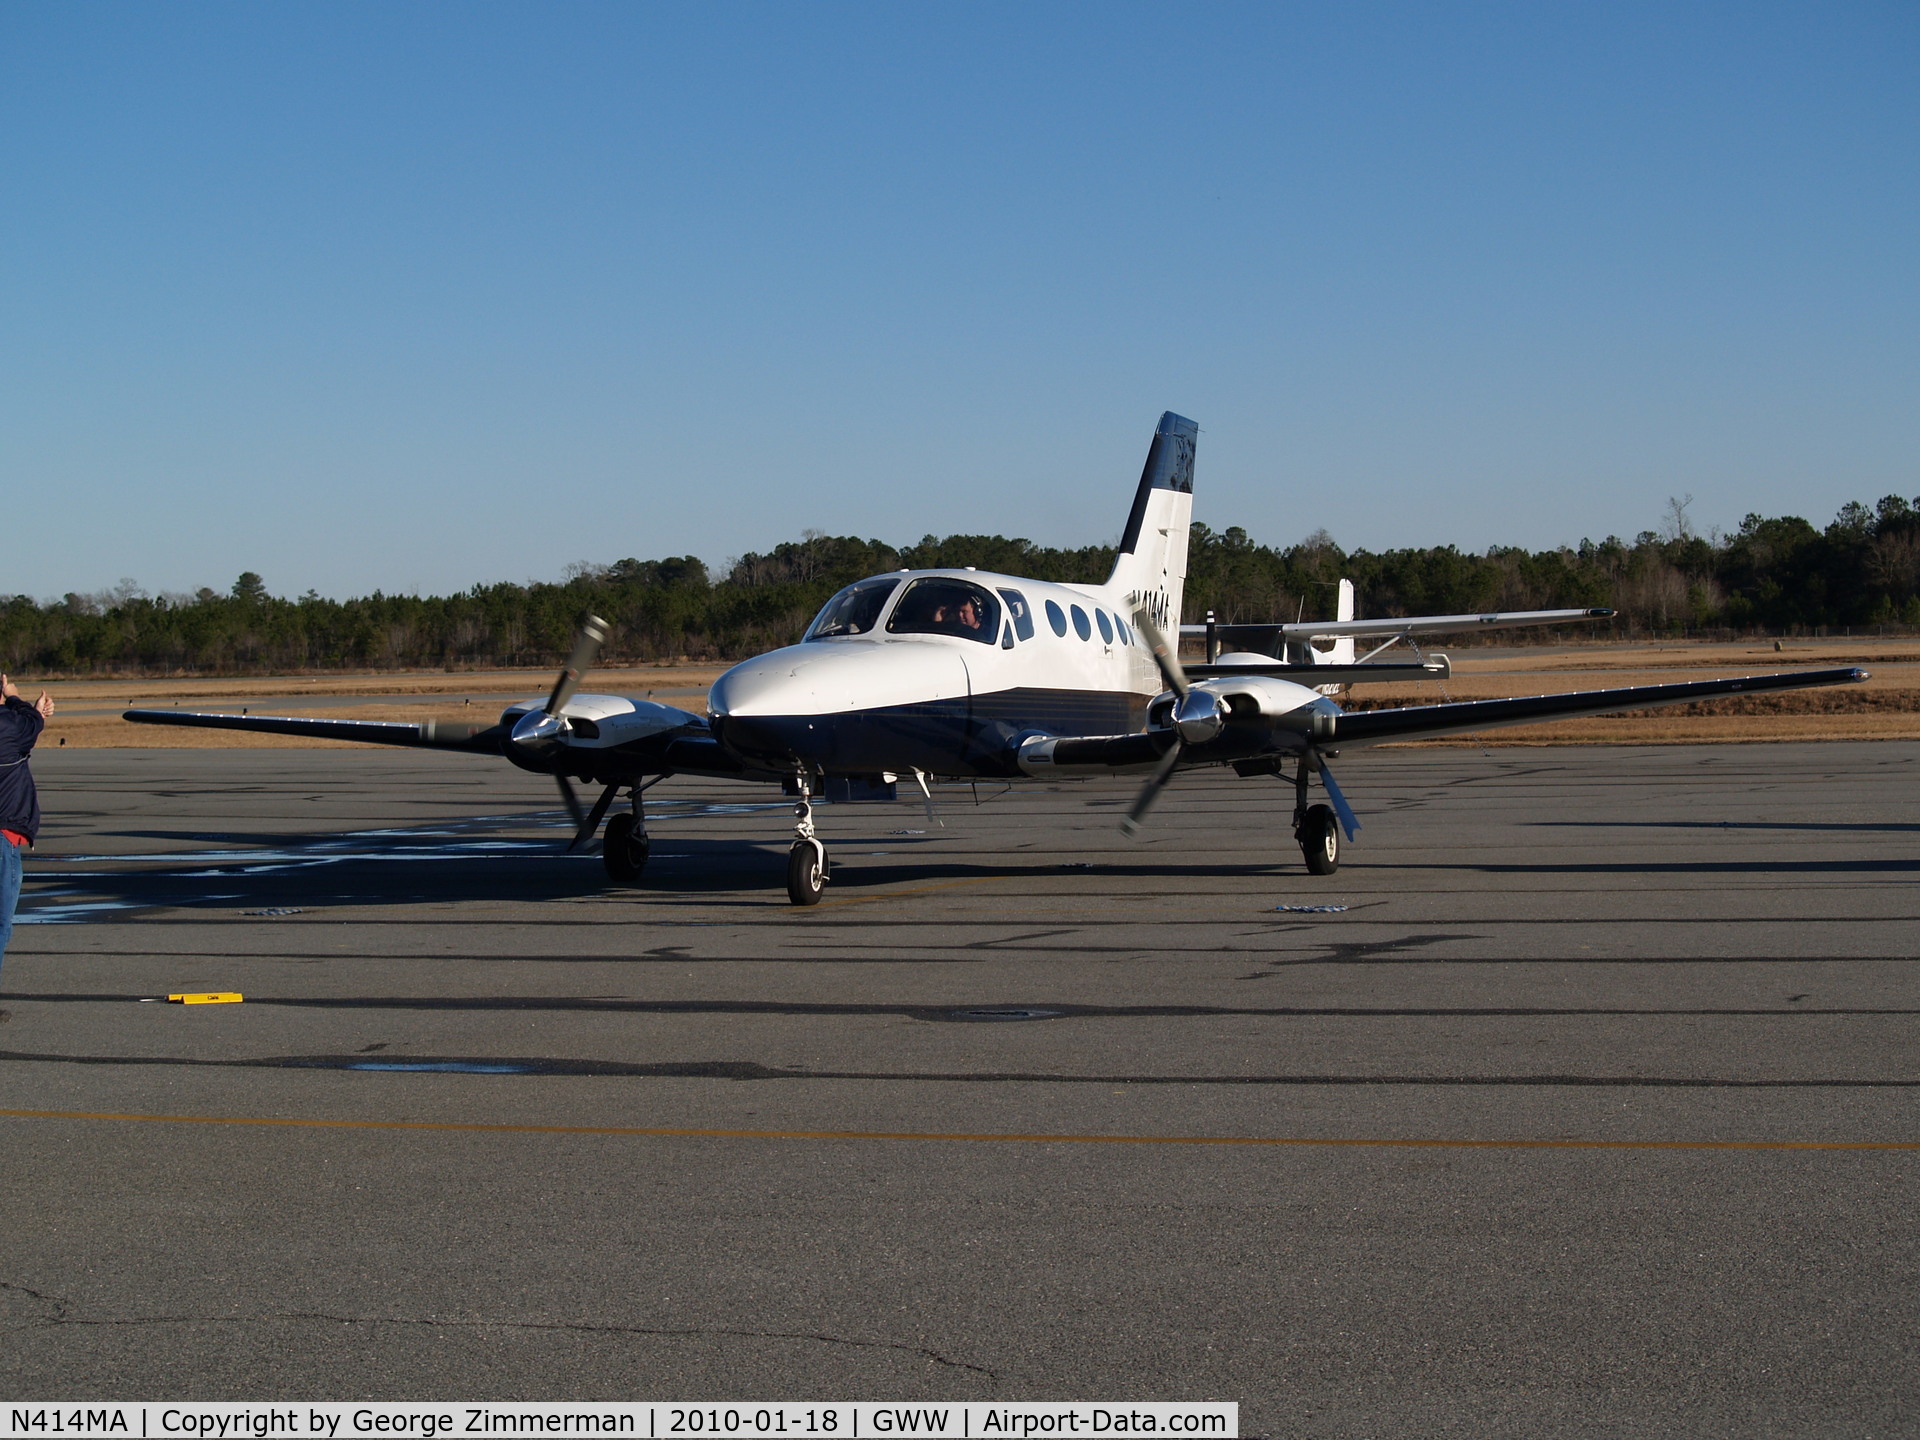 N414MA, 1979 Cessna 414A Chancellor C/N 414A0248, Stop-over for fuel enroute to Haiti to ferry earthquake supplies